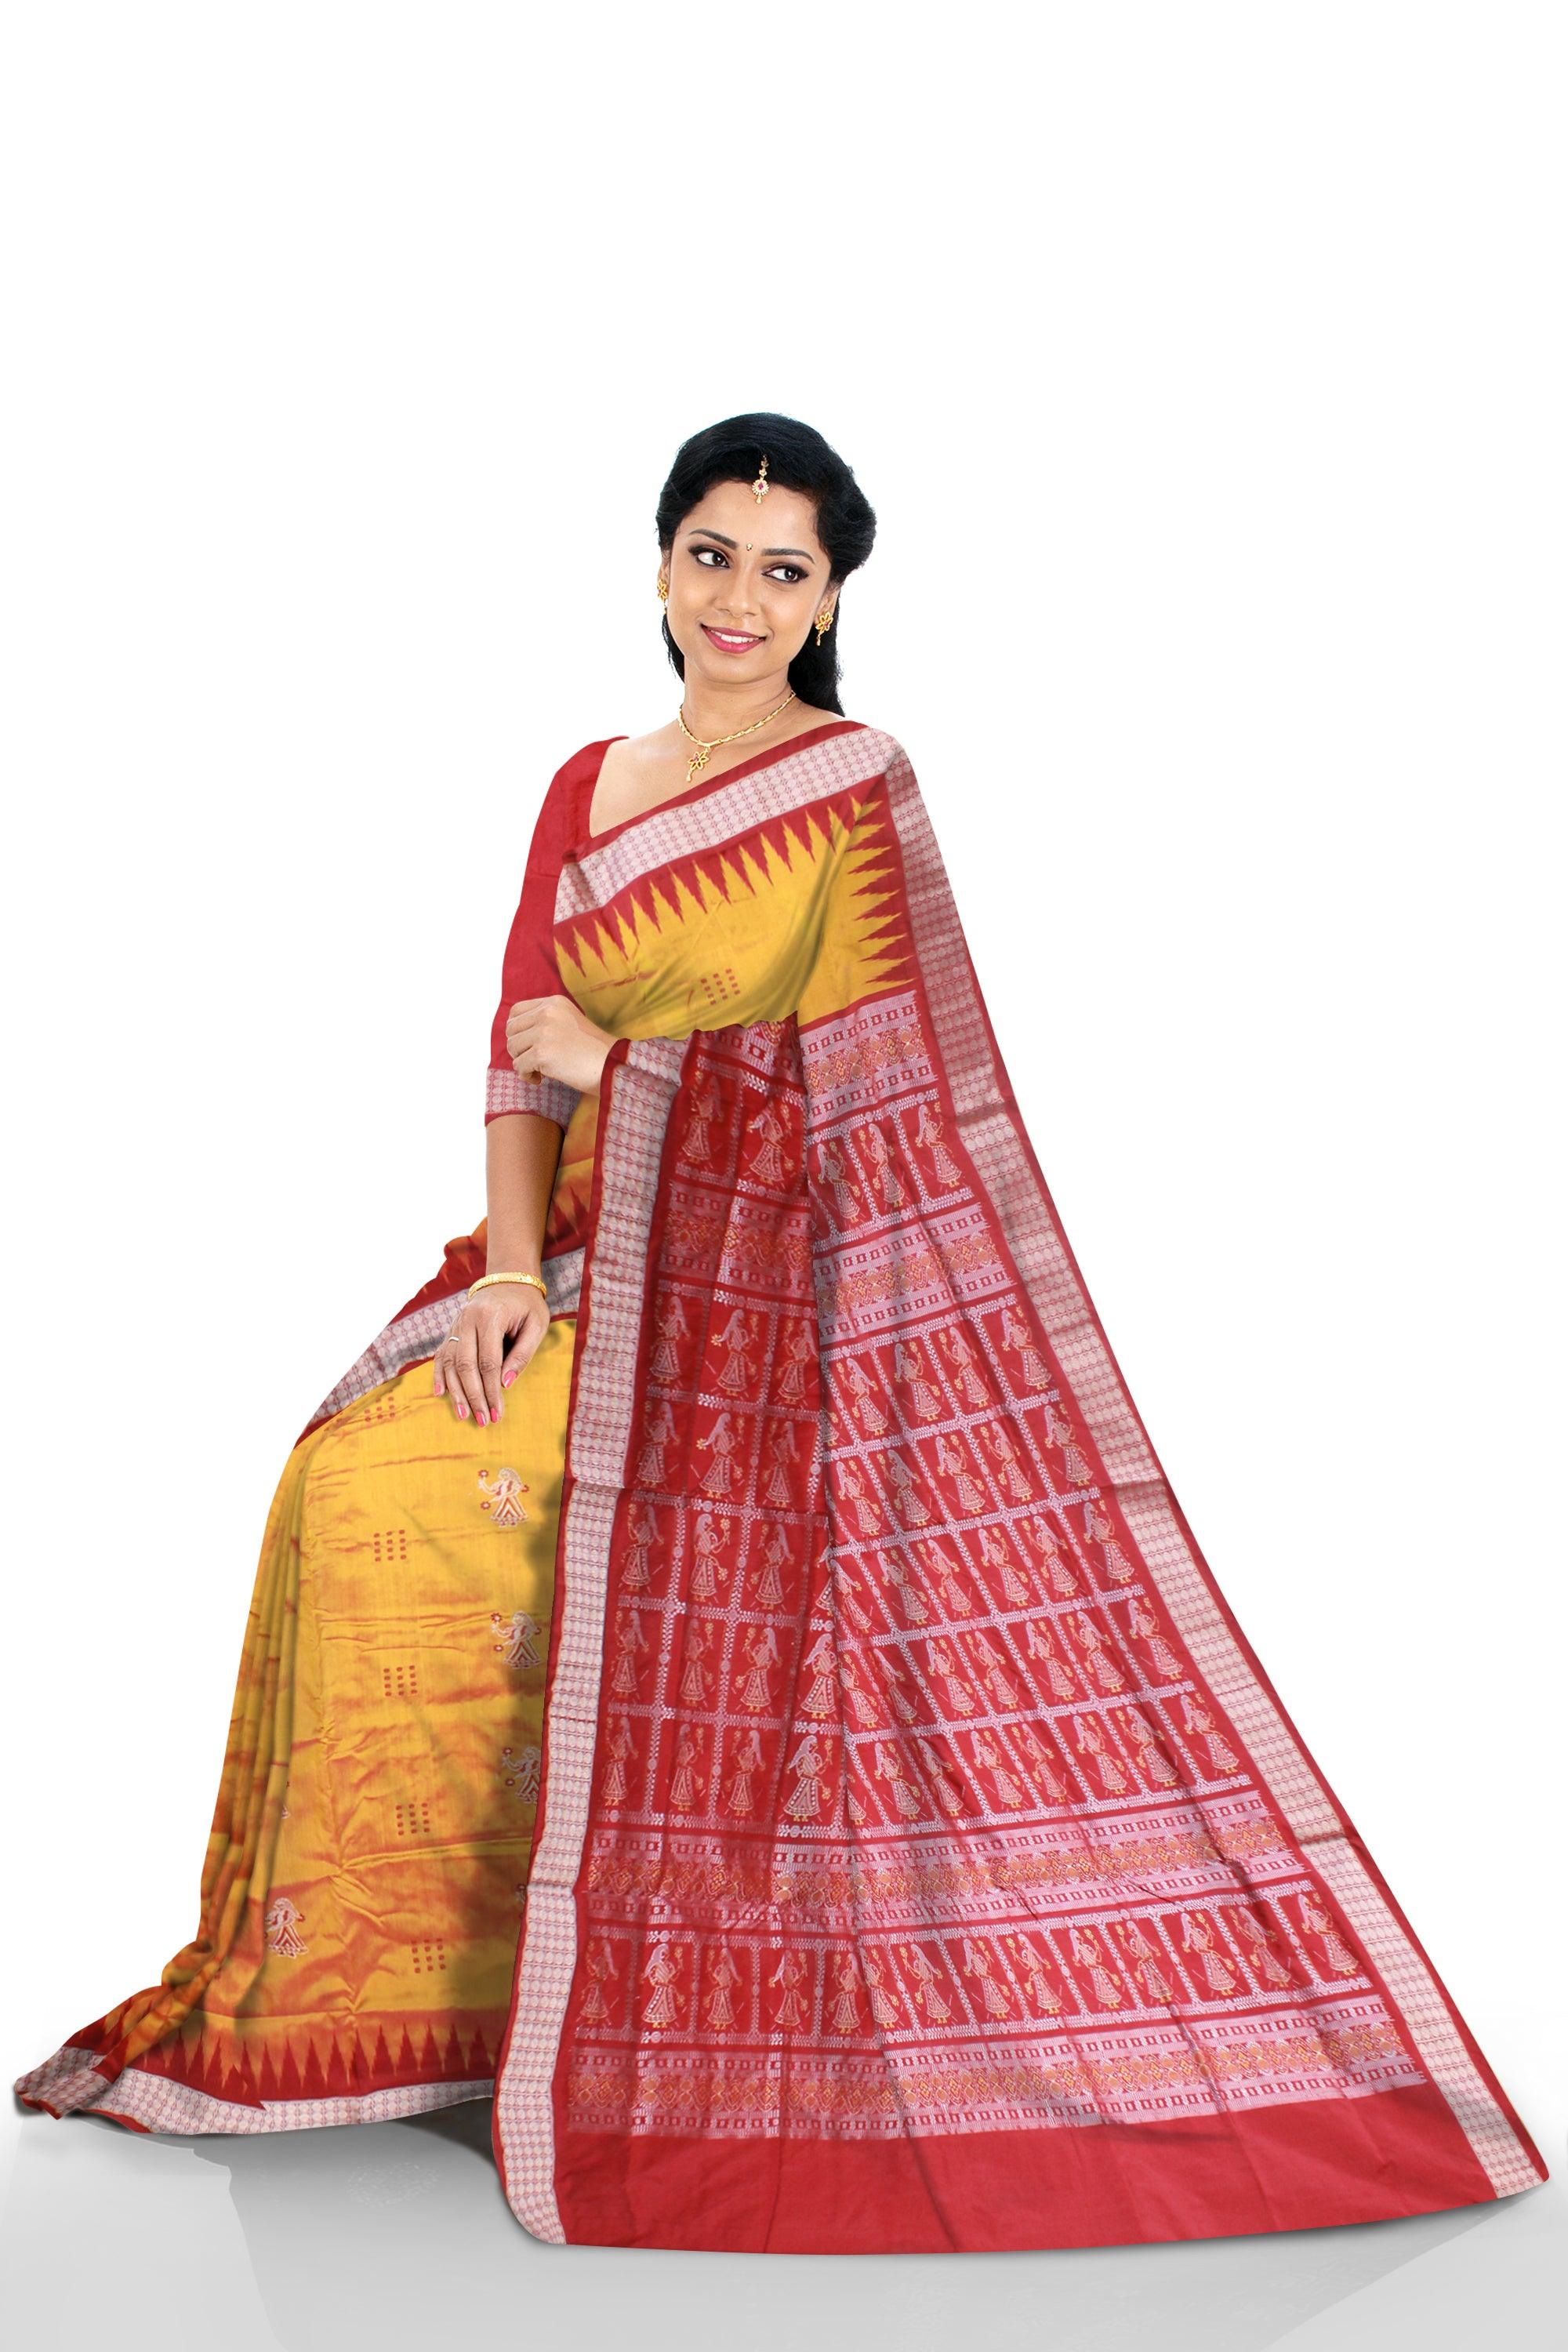 FULL BODY AND PALLU DOLL PRINT PATA SAREE IS YELLOW AND RED COLOR BASE, COMES WITH BLOUSE PIECE. - Koshali Arts & Crafts Enterprise